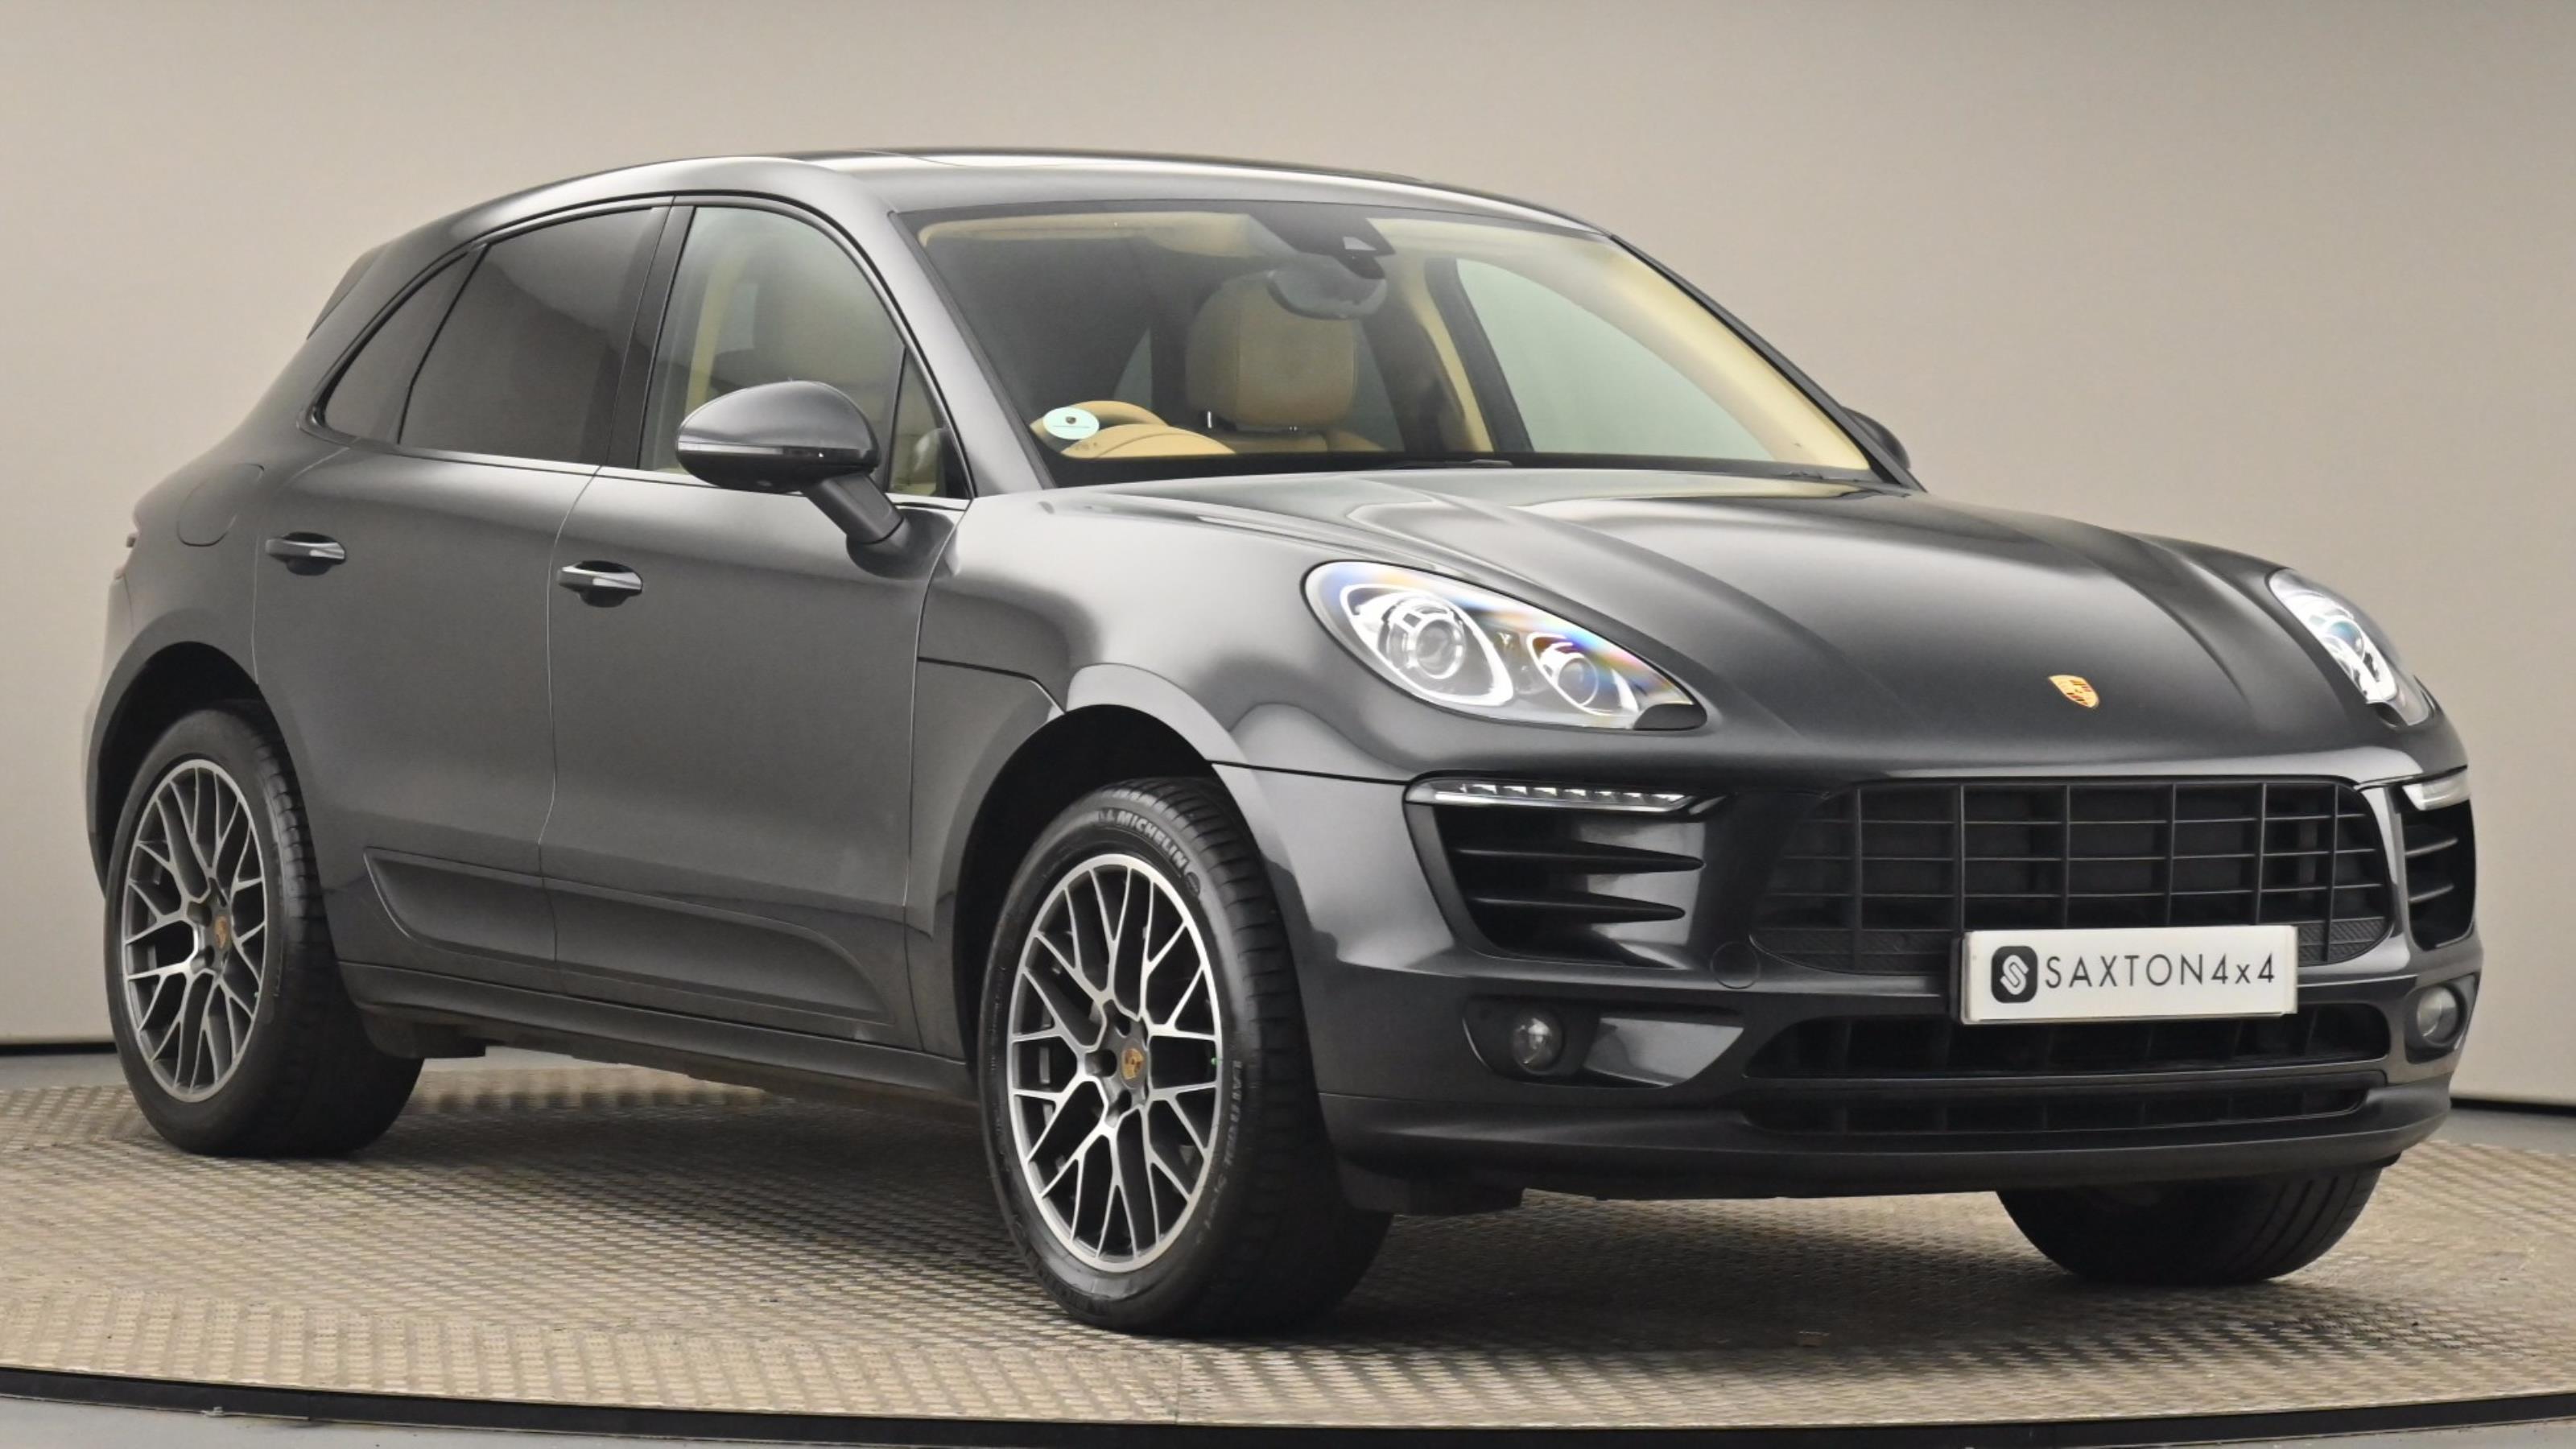 Used 2017 Porsche MACAN S 5dr PDK £36,500 37,062 miles